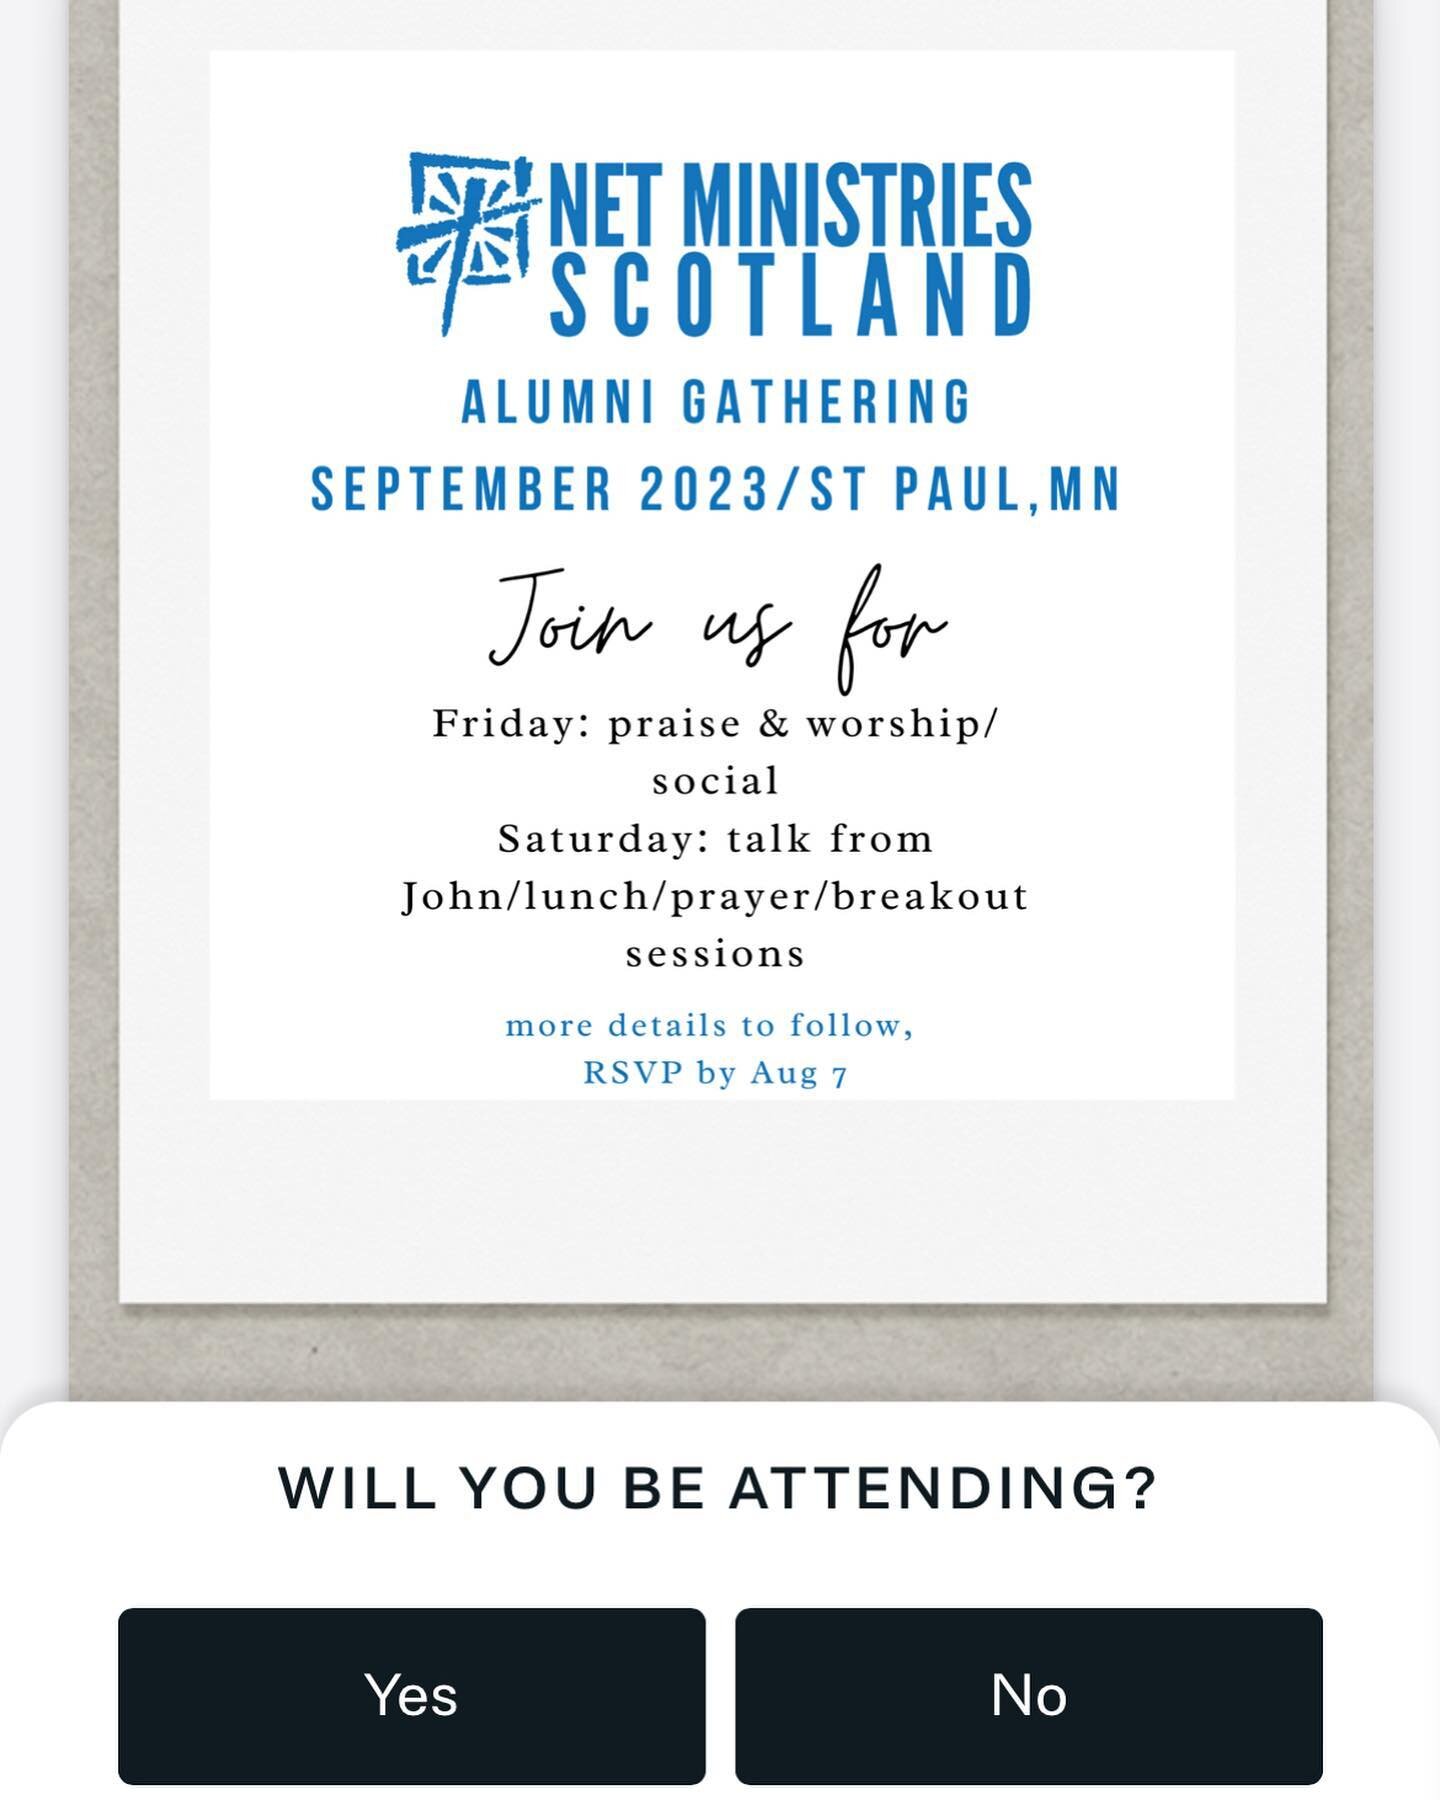 Alumni!! Let&rsquo;s hang out! 
We just sent invites out to our September alumni gathering in St. Paul, Minnesota. 
Didn&rsquo;t get the email? Dm us and update us on your contact details. See you there.